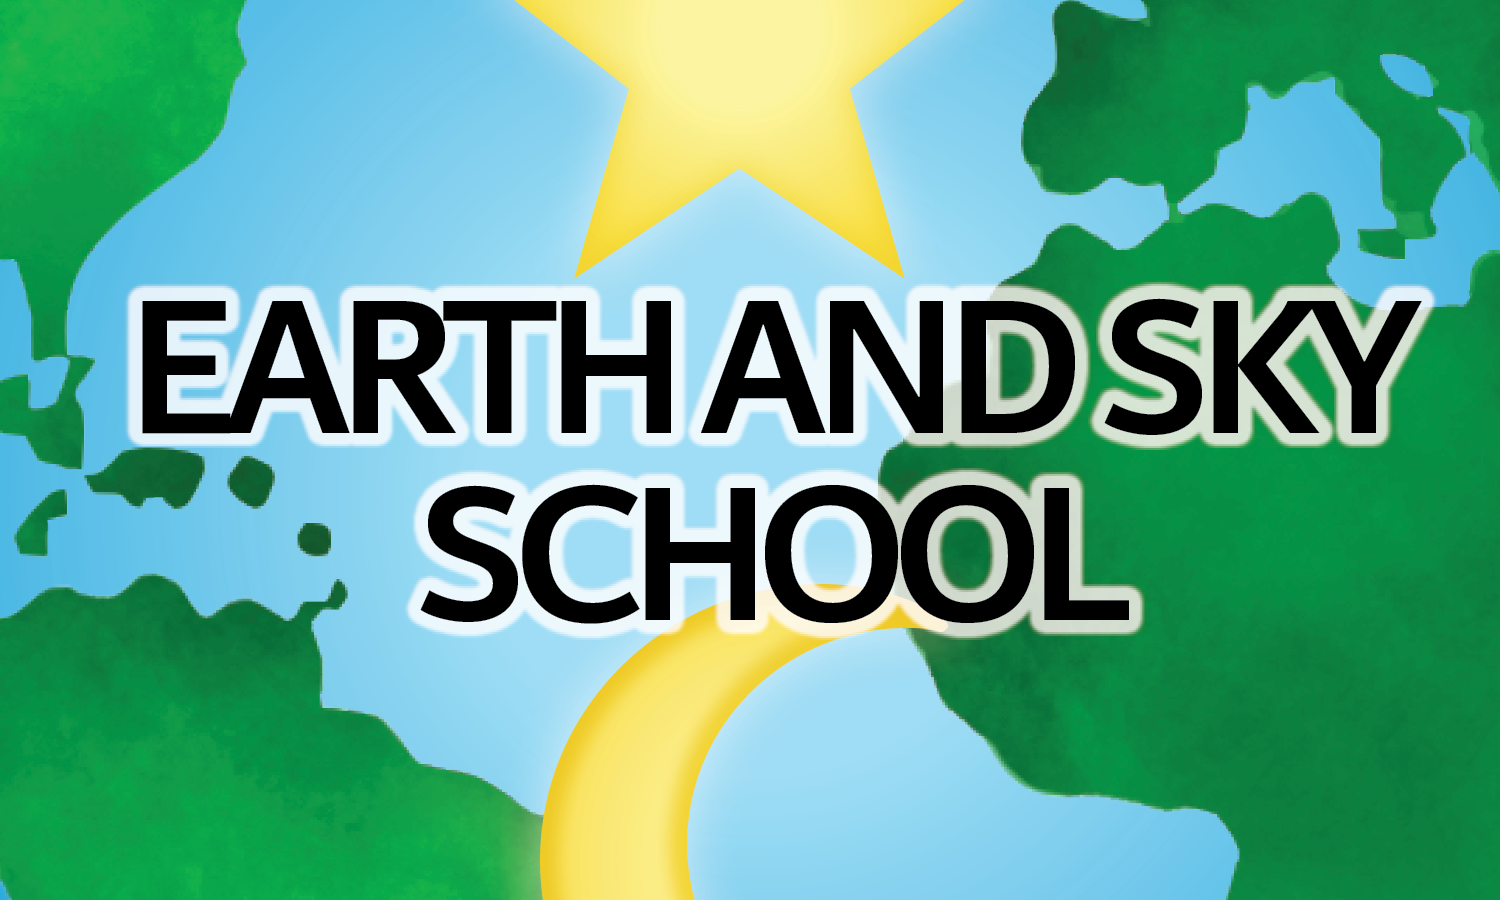 The Earth and Sky School Collection